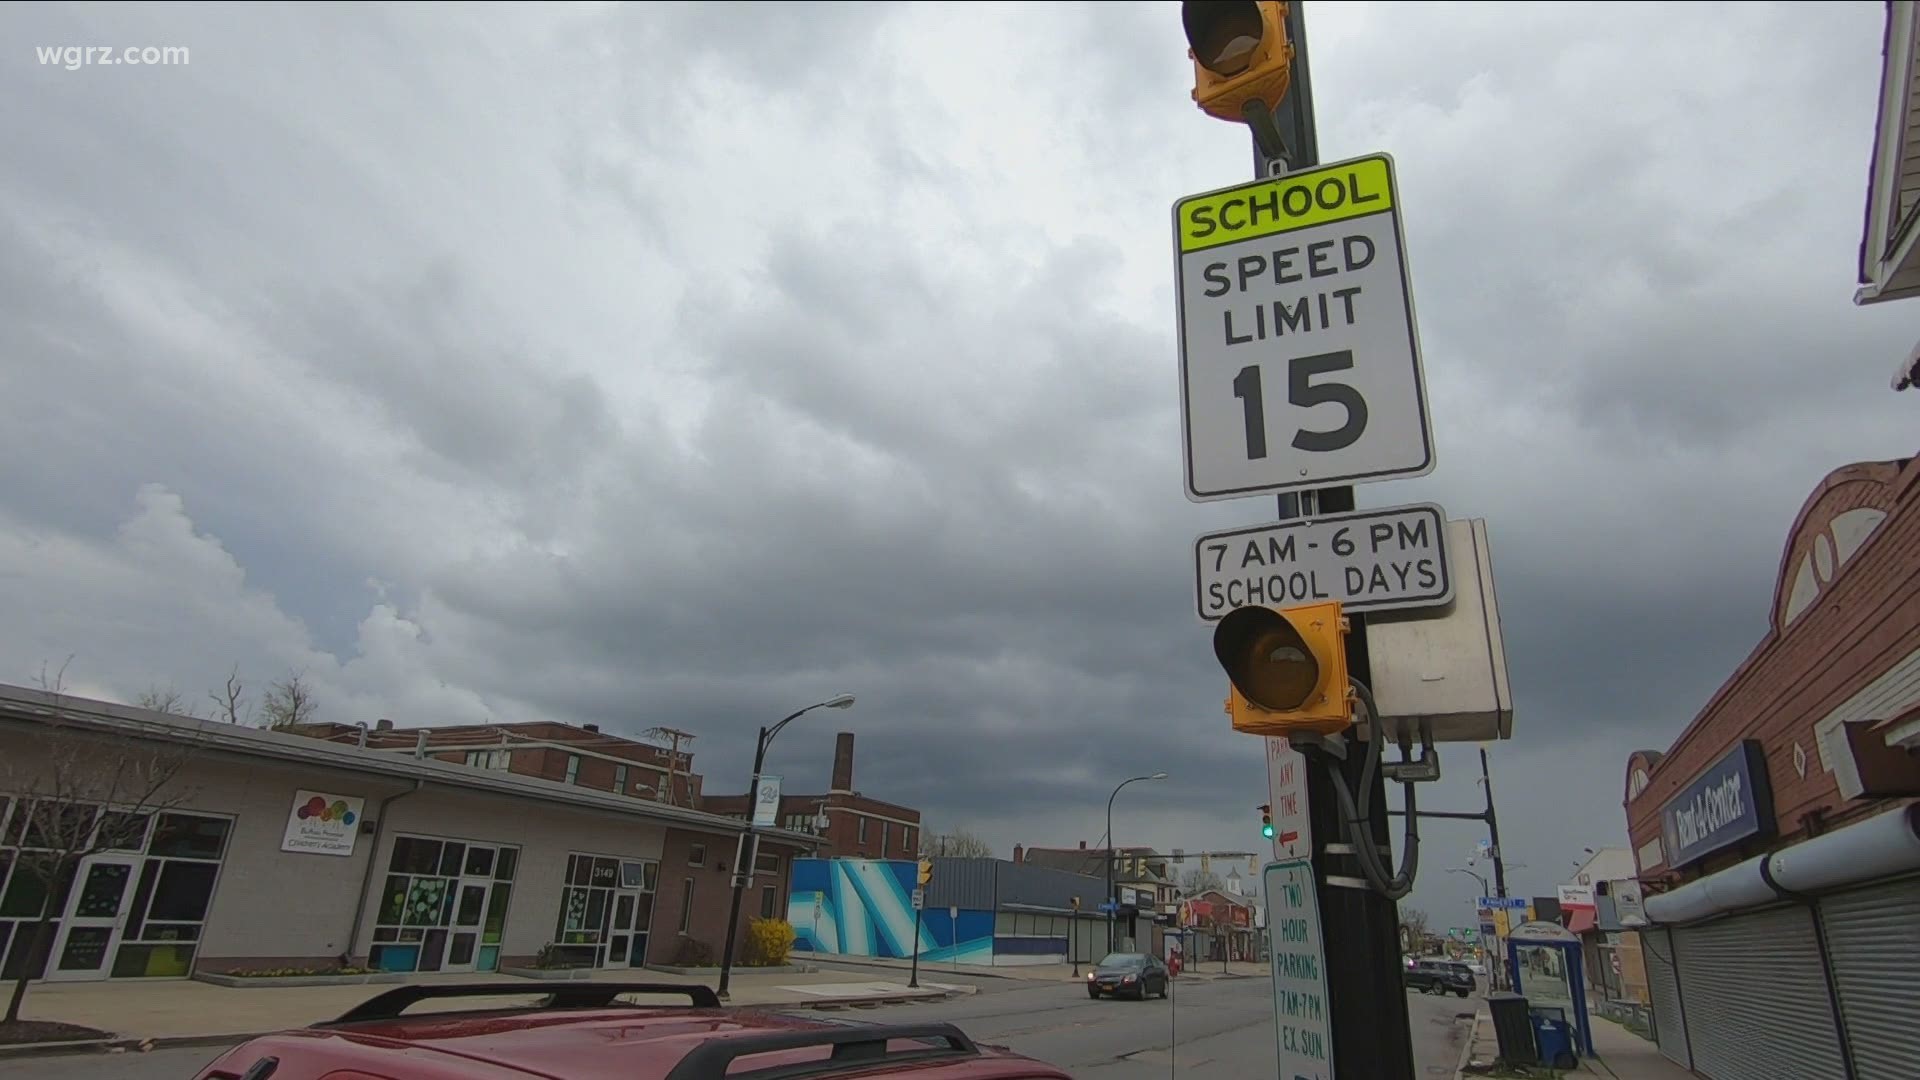 The City of Buffalo does not list exceptions for school breaks on their school zone safety website, but it is facing pushback with some Common Council members.